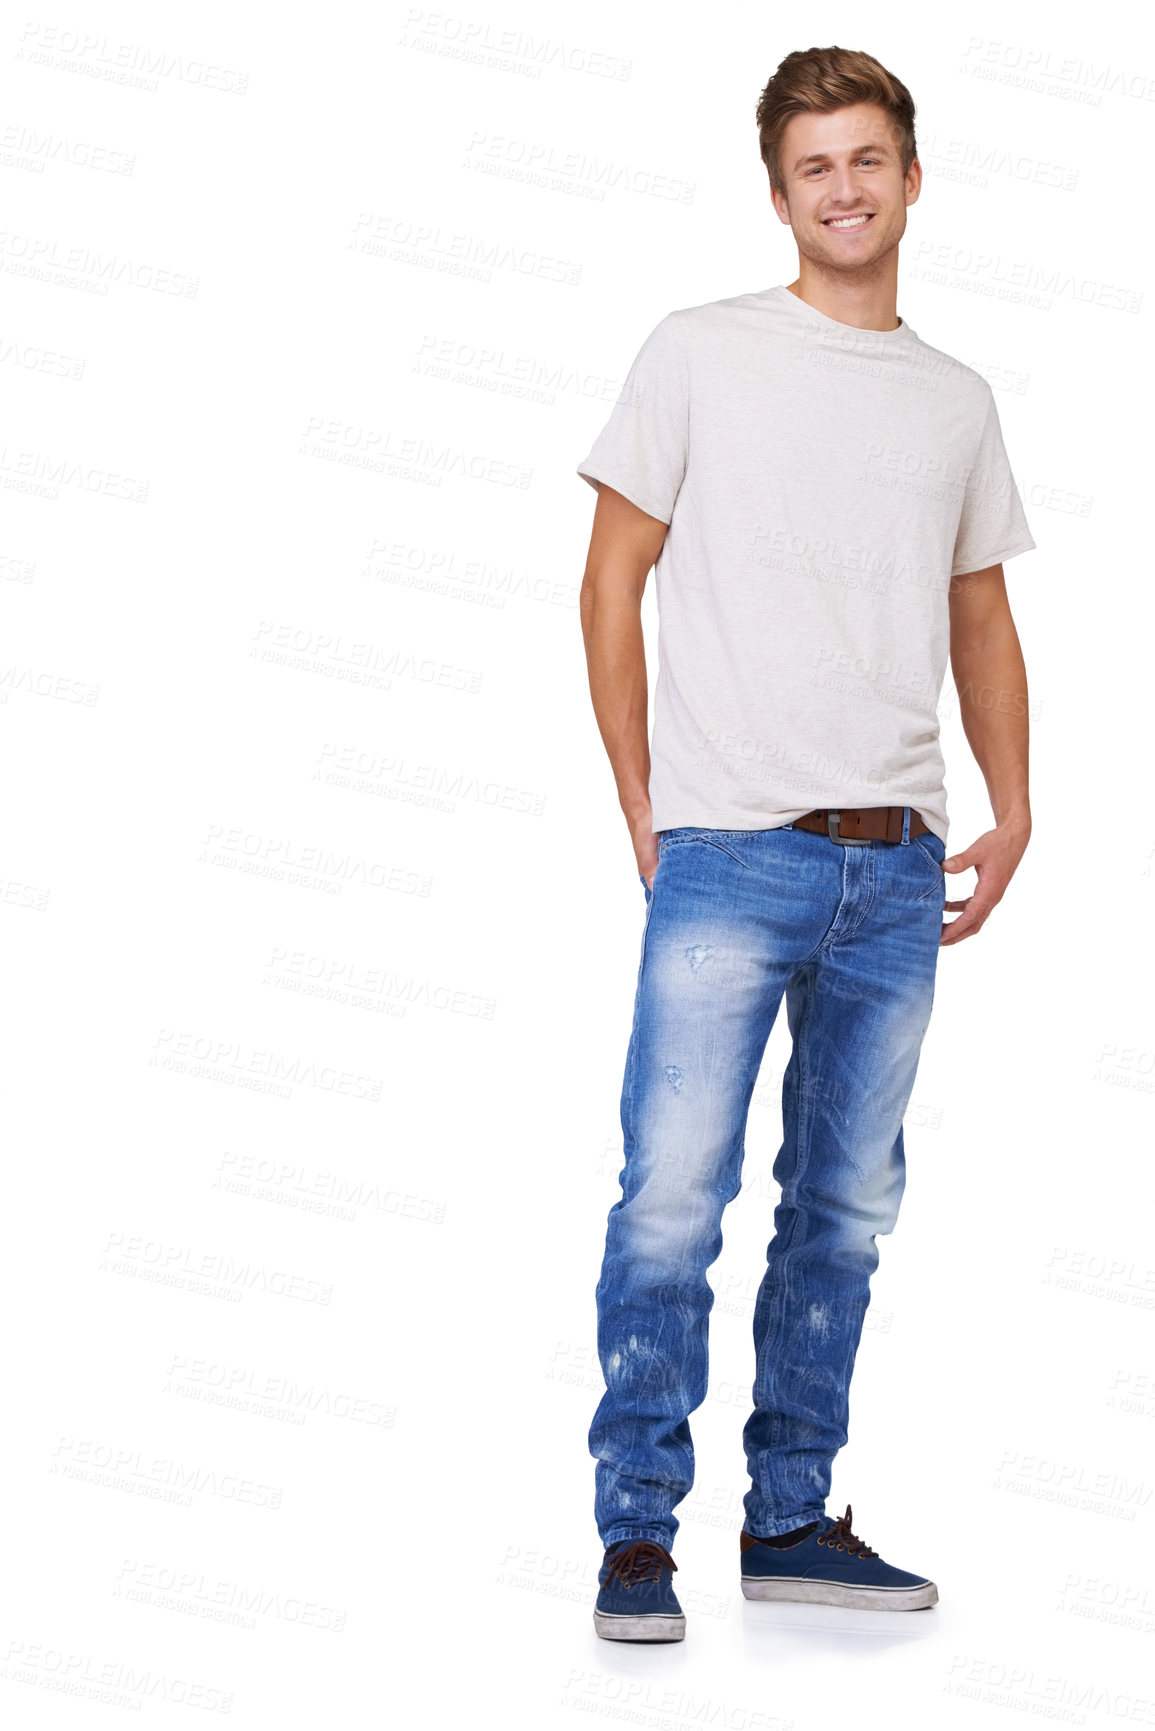 Buy stock photo Full length portrait of a happy young man dressed casually